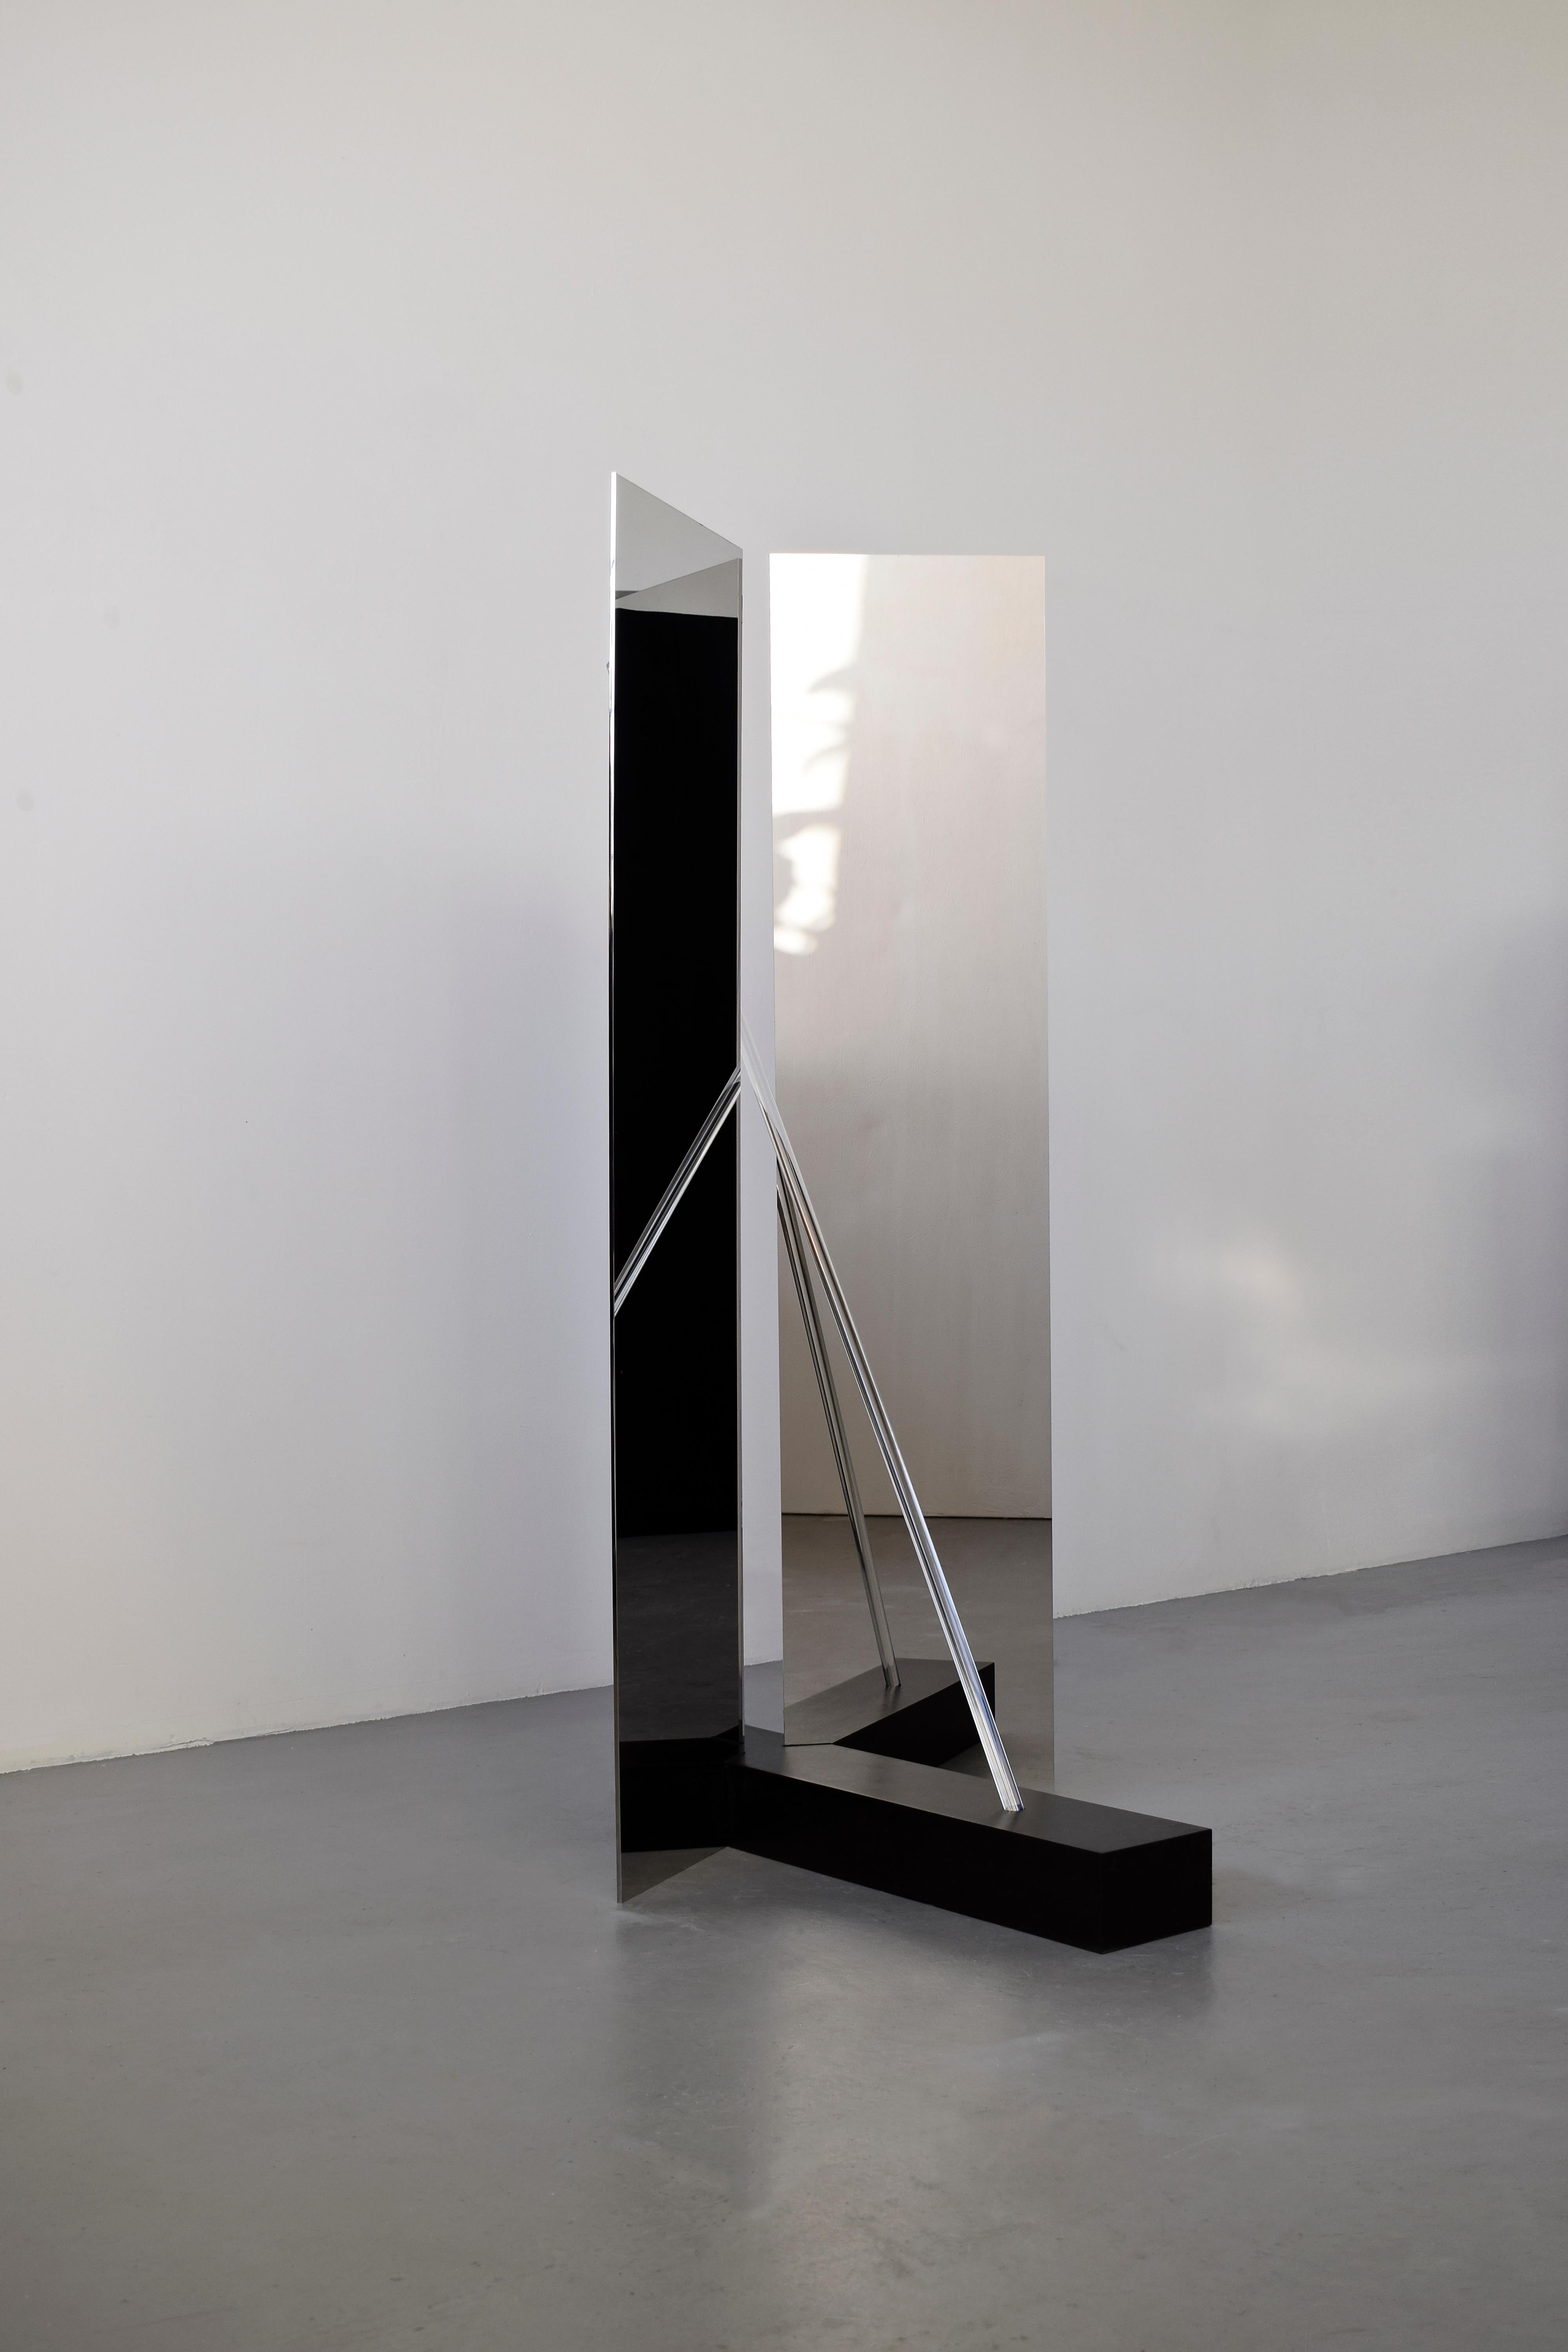 Elusive 04
A beautiful piece exploring the line between visible and invisible: half mirror, half sculpture.
By Maximilian Michaelis.

Belgium bluestone, polished stainless steel, acrylic glass, Led
Measure: 155 x 105 x 63 cm.